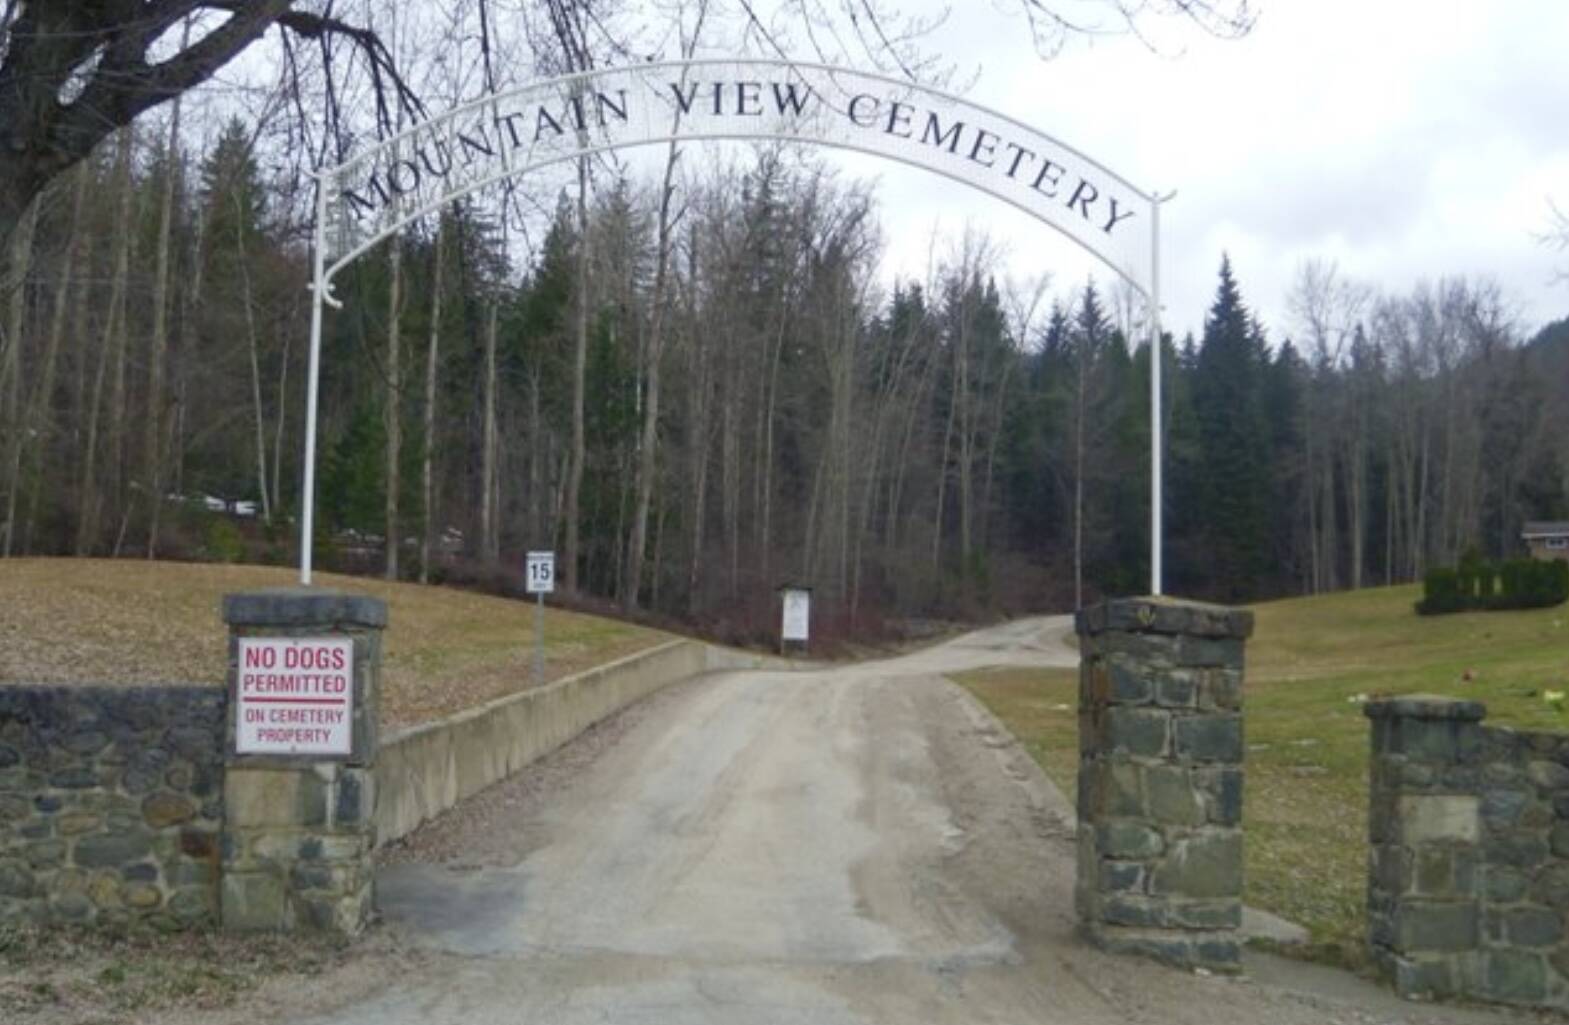 Mountain View Cemetery was opened by the City of Trail in 1932. Today, its management falls to the regional district.